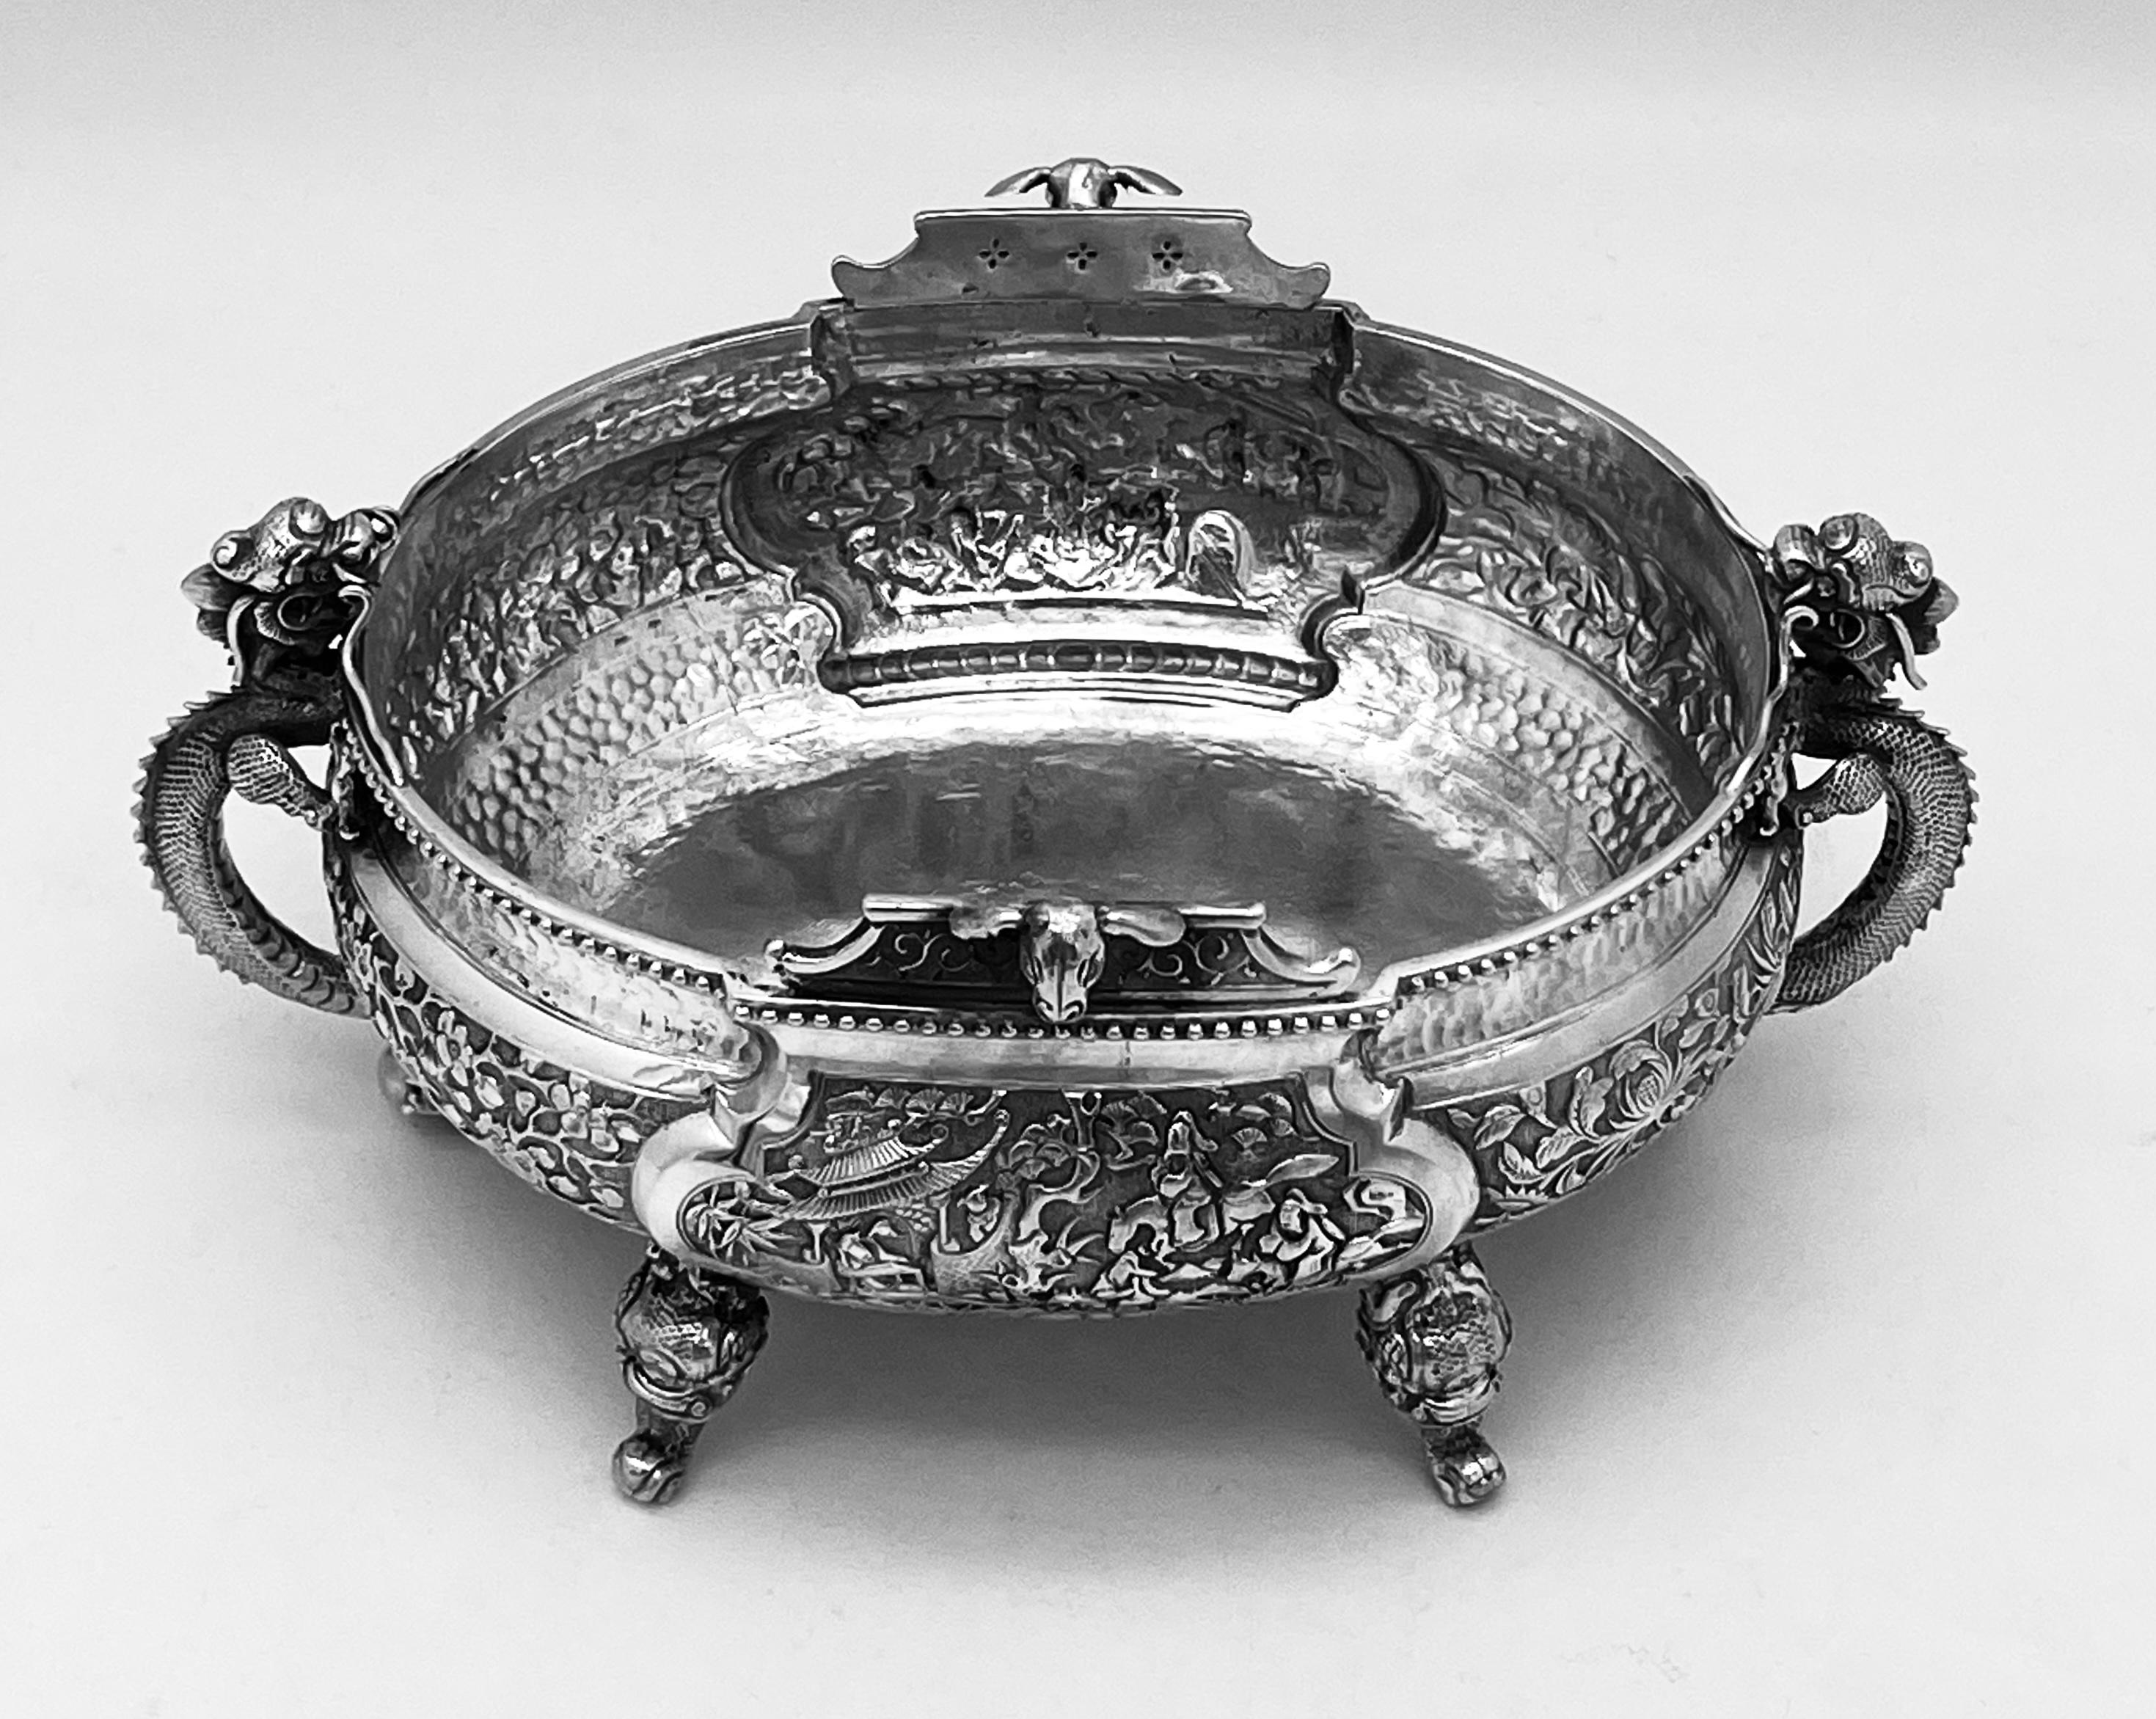 A Chinese export silver oval bowl or jardiniere, made by Tu Mao Xing, '涂茂興‘, circa 1890. There are two dragon handles, and four dragon feet. There is a beaded rim and two animal heads, possibly sheep, looking out. The main panels depict the story of